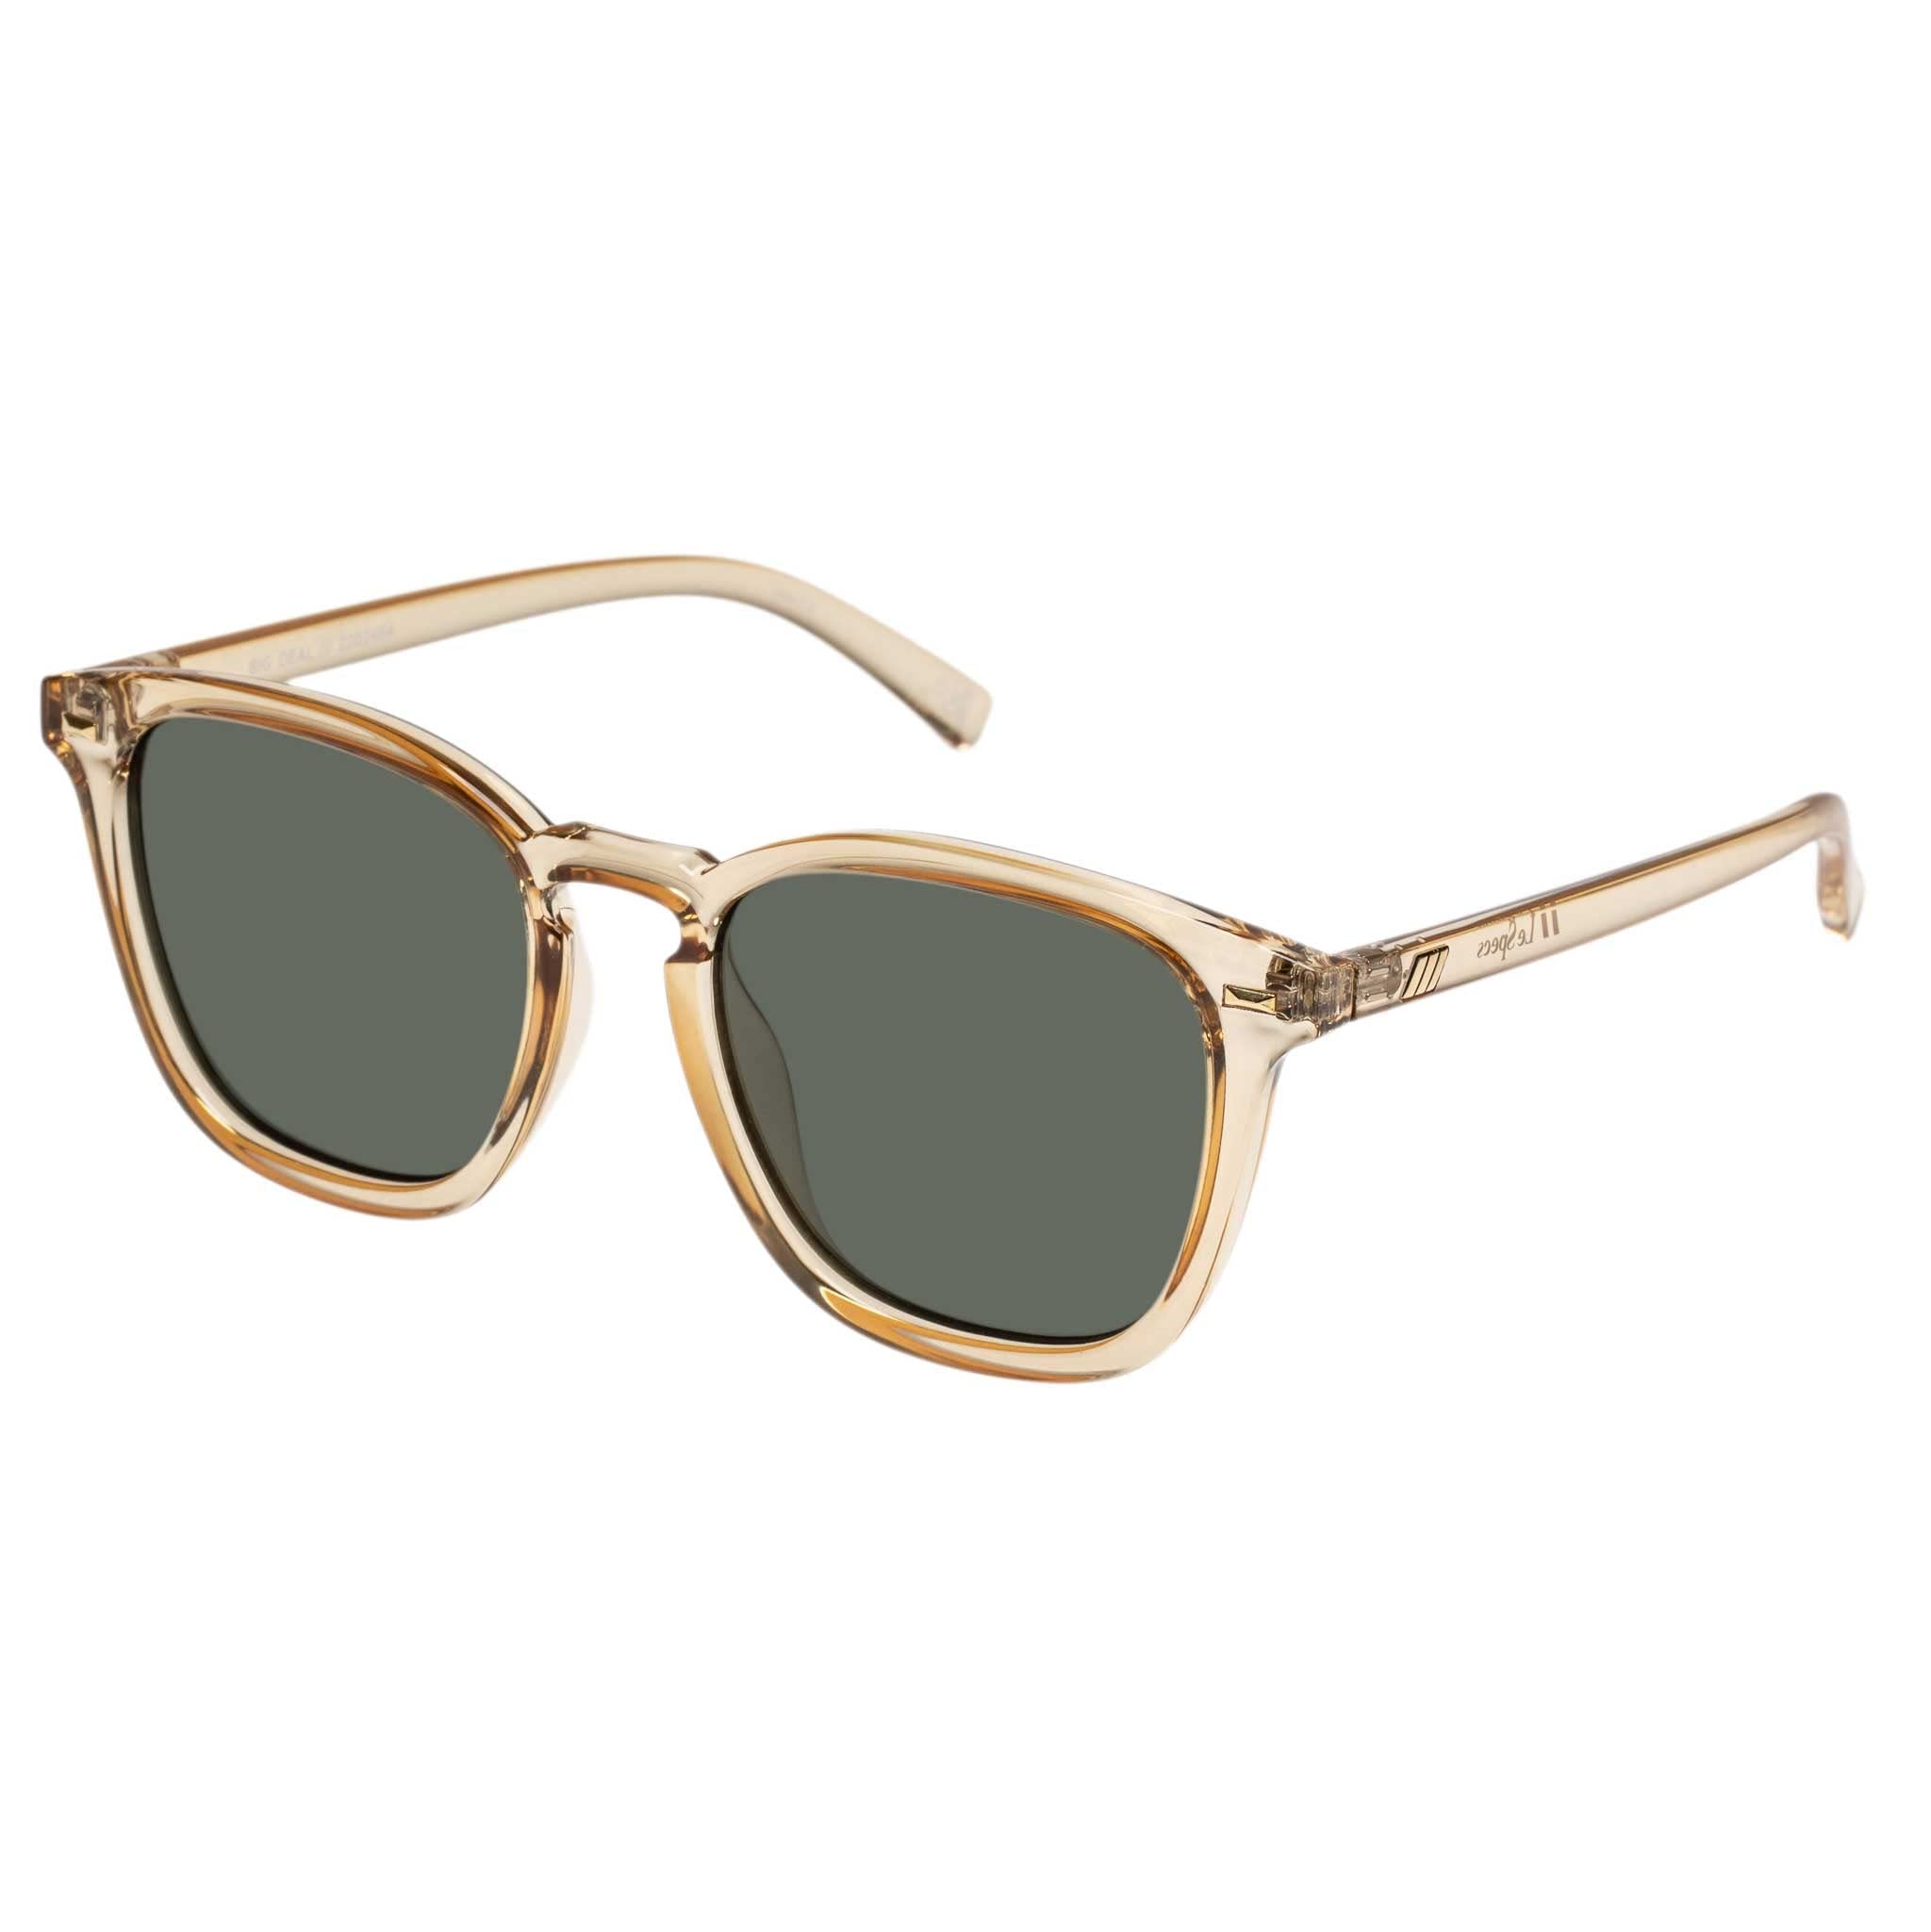 Le Specs Womens Big Deal Sunglasses, Sand, Tan, green, One Size